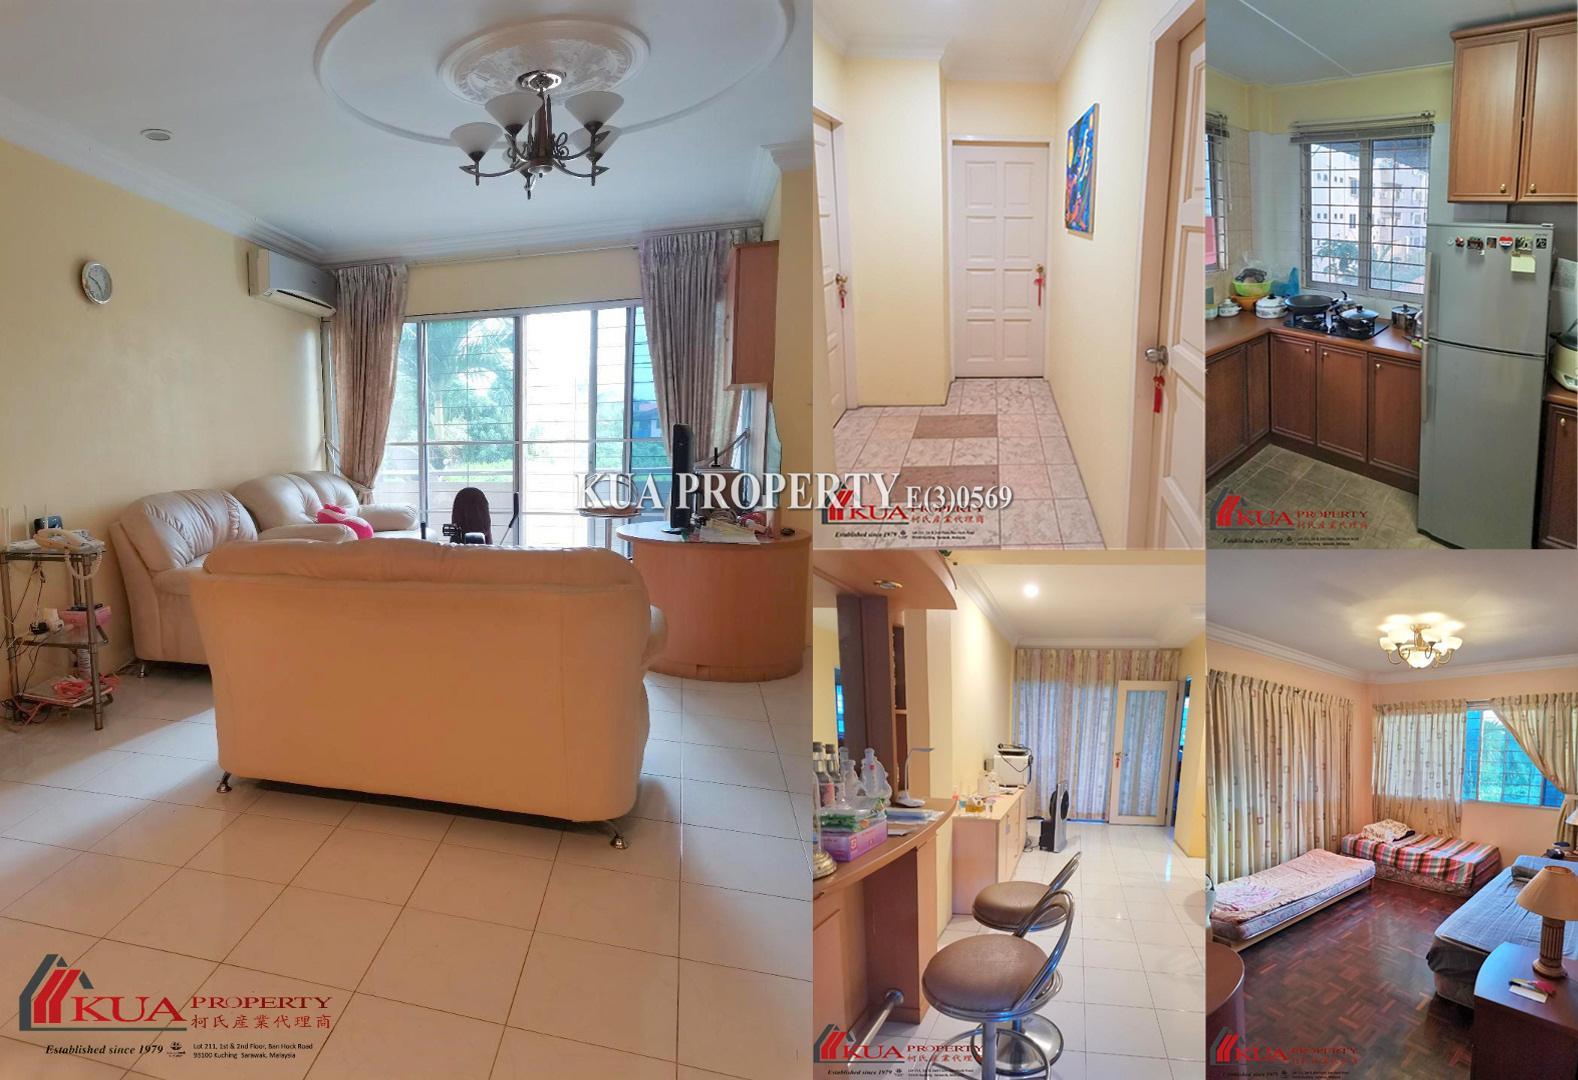 Central Court Apartment For Sale! at Central Road,Kuching